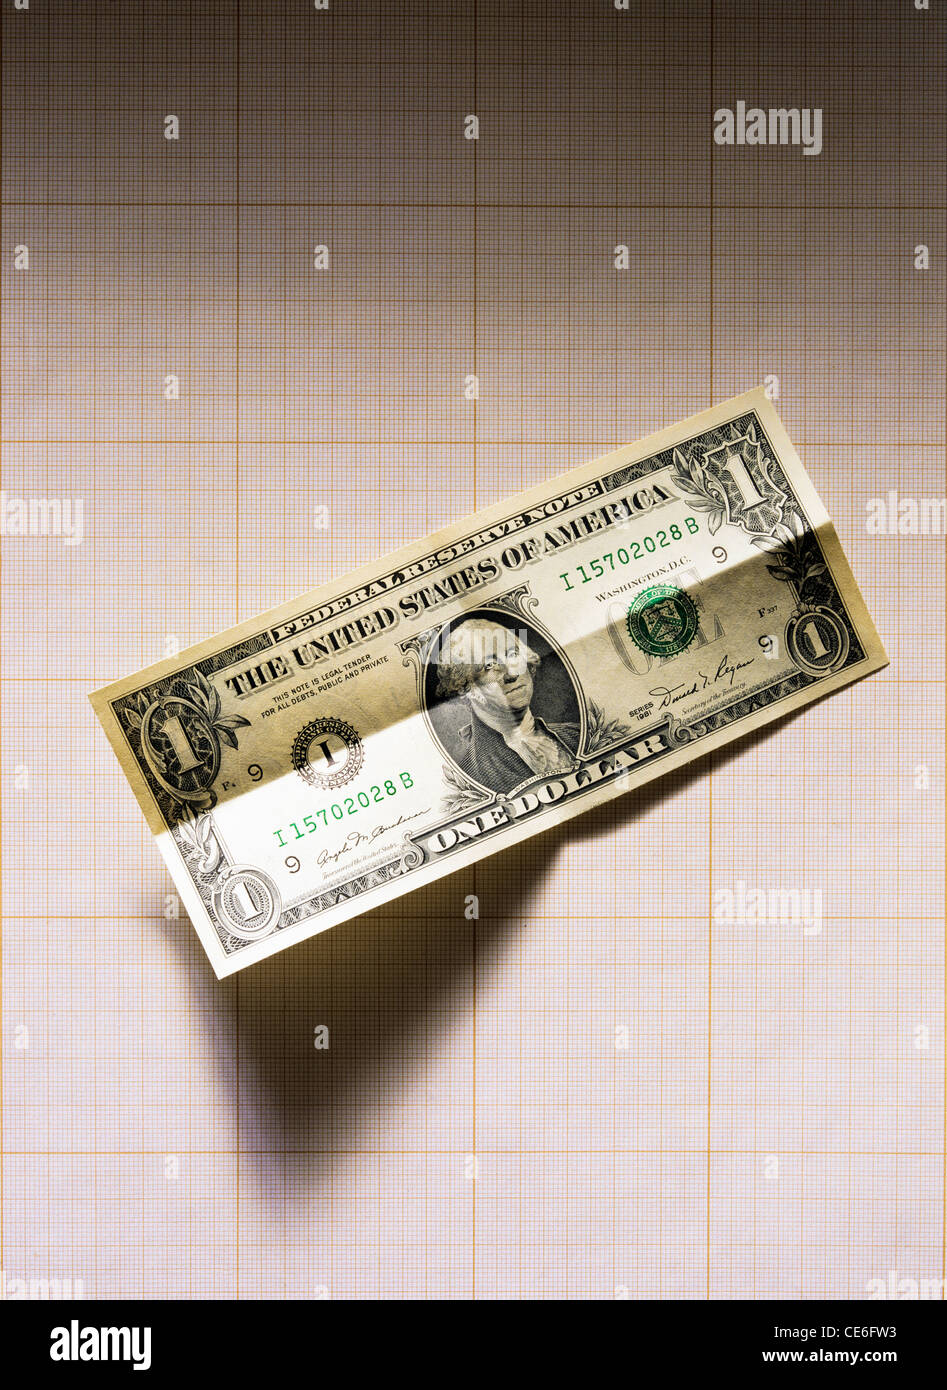 UNFOLDED 1 US DOLLAR BANKNOTE ON GRAPH PAPER Stock Photo